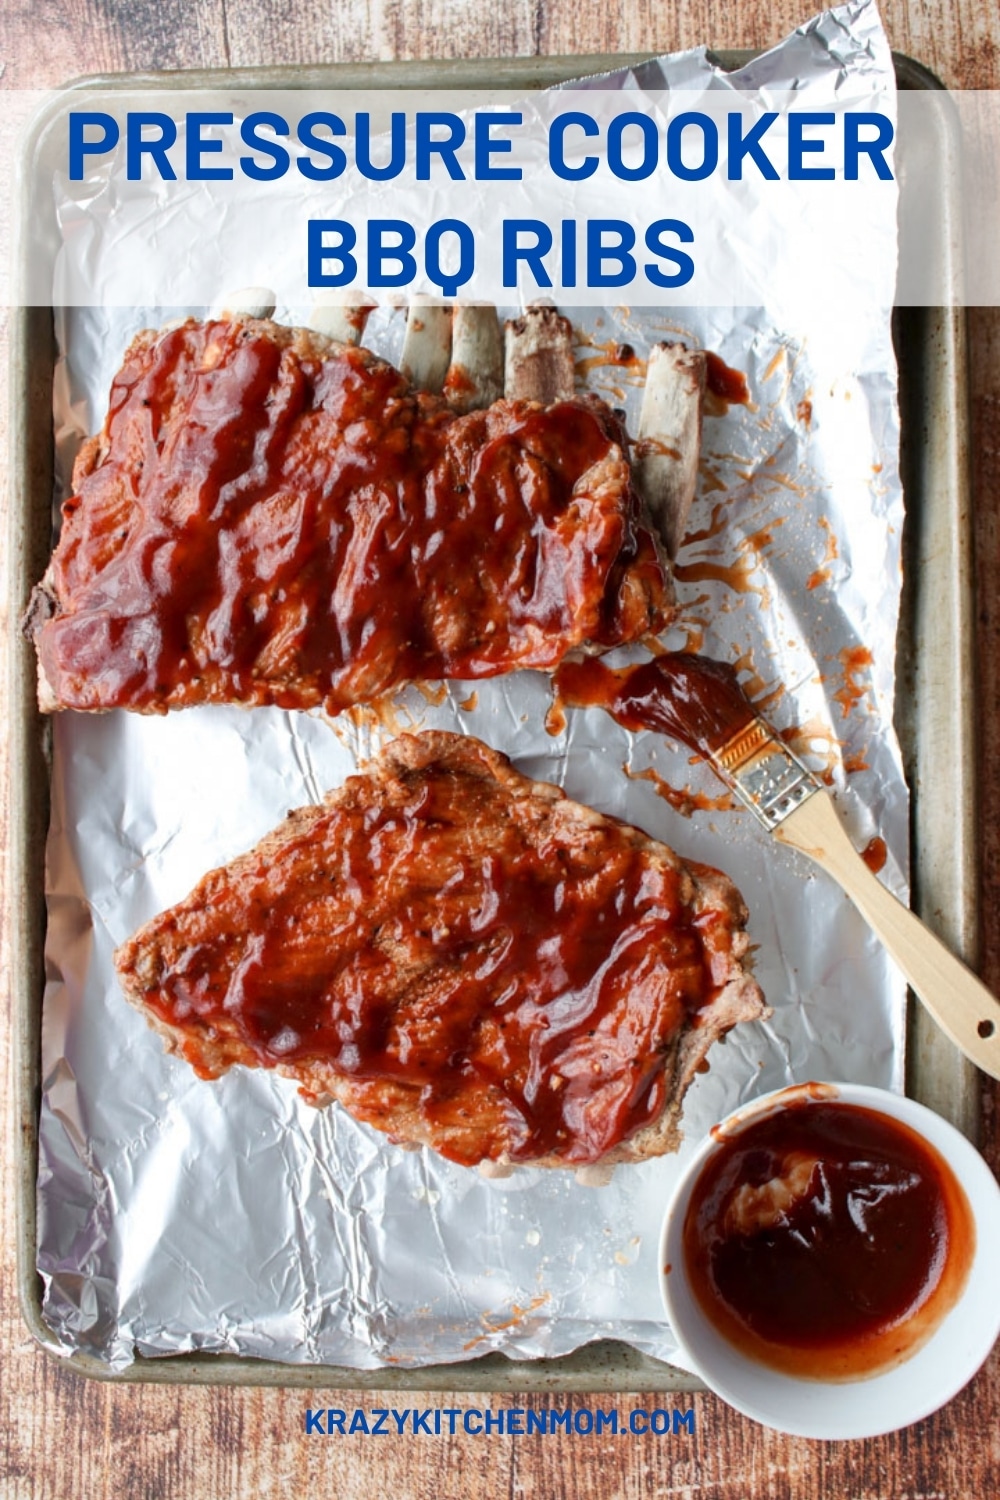 Tender, juicy, fall-off-the-bone, finger-licking ribs in less than 30 minutes made in a pressure cooker. Perfect for any weeknight dinner. via @krazykitchenmom